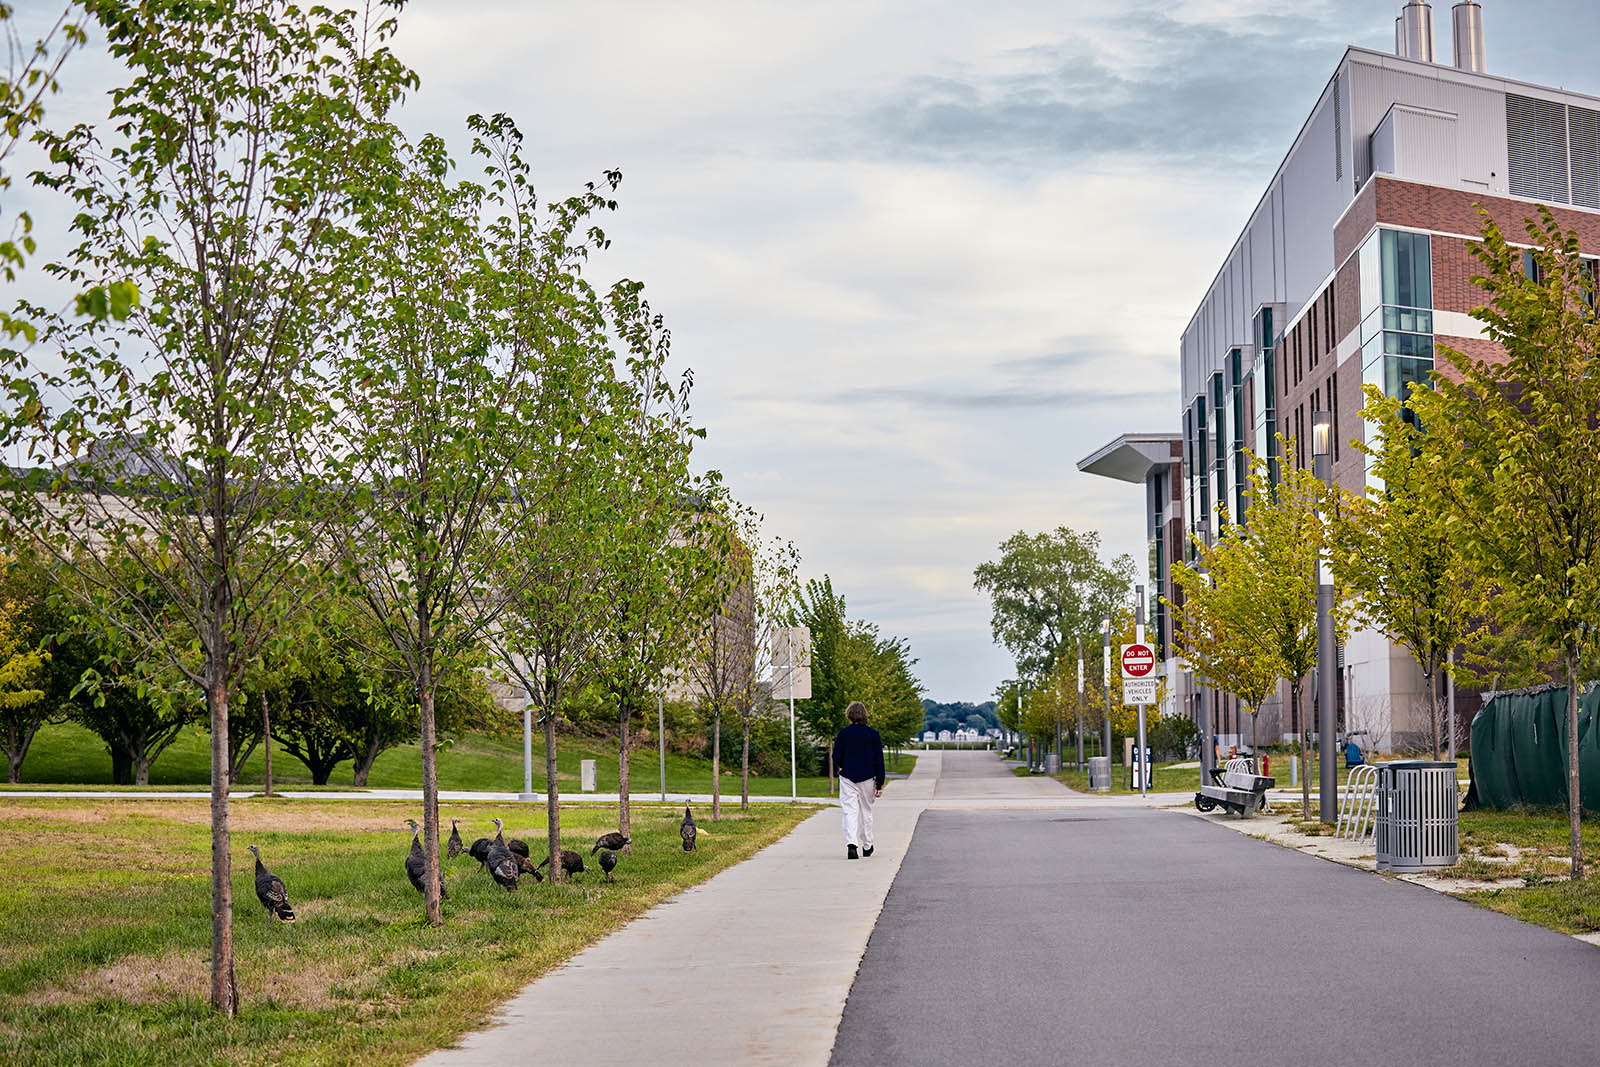 Photo showing an paved path with a male walking with it's back towards the camera. A flock of turkeys is showing on the left and a building to the right of the path